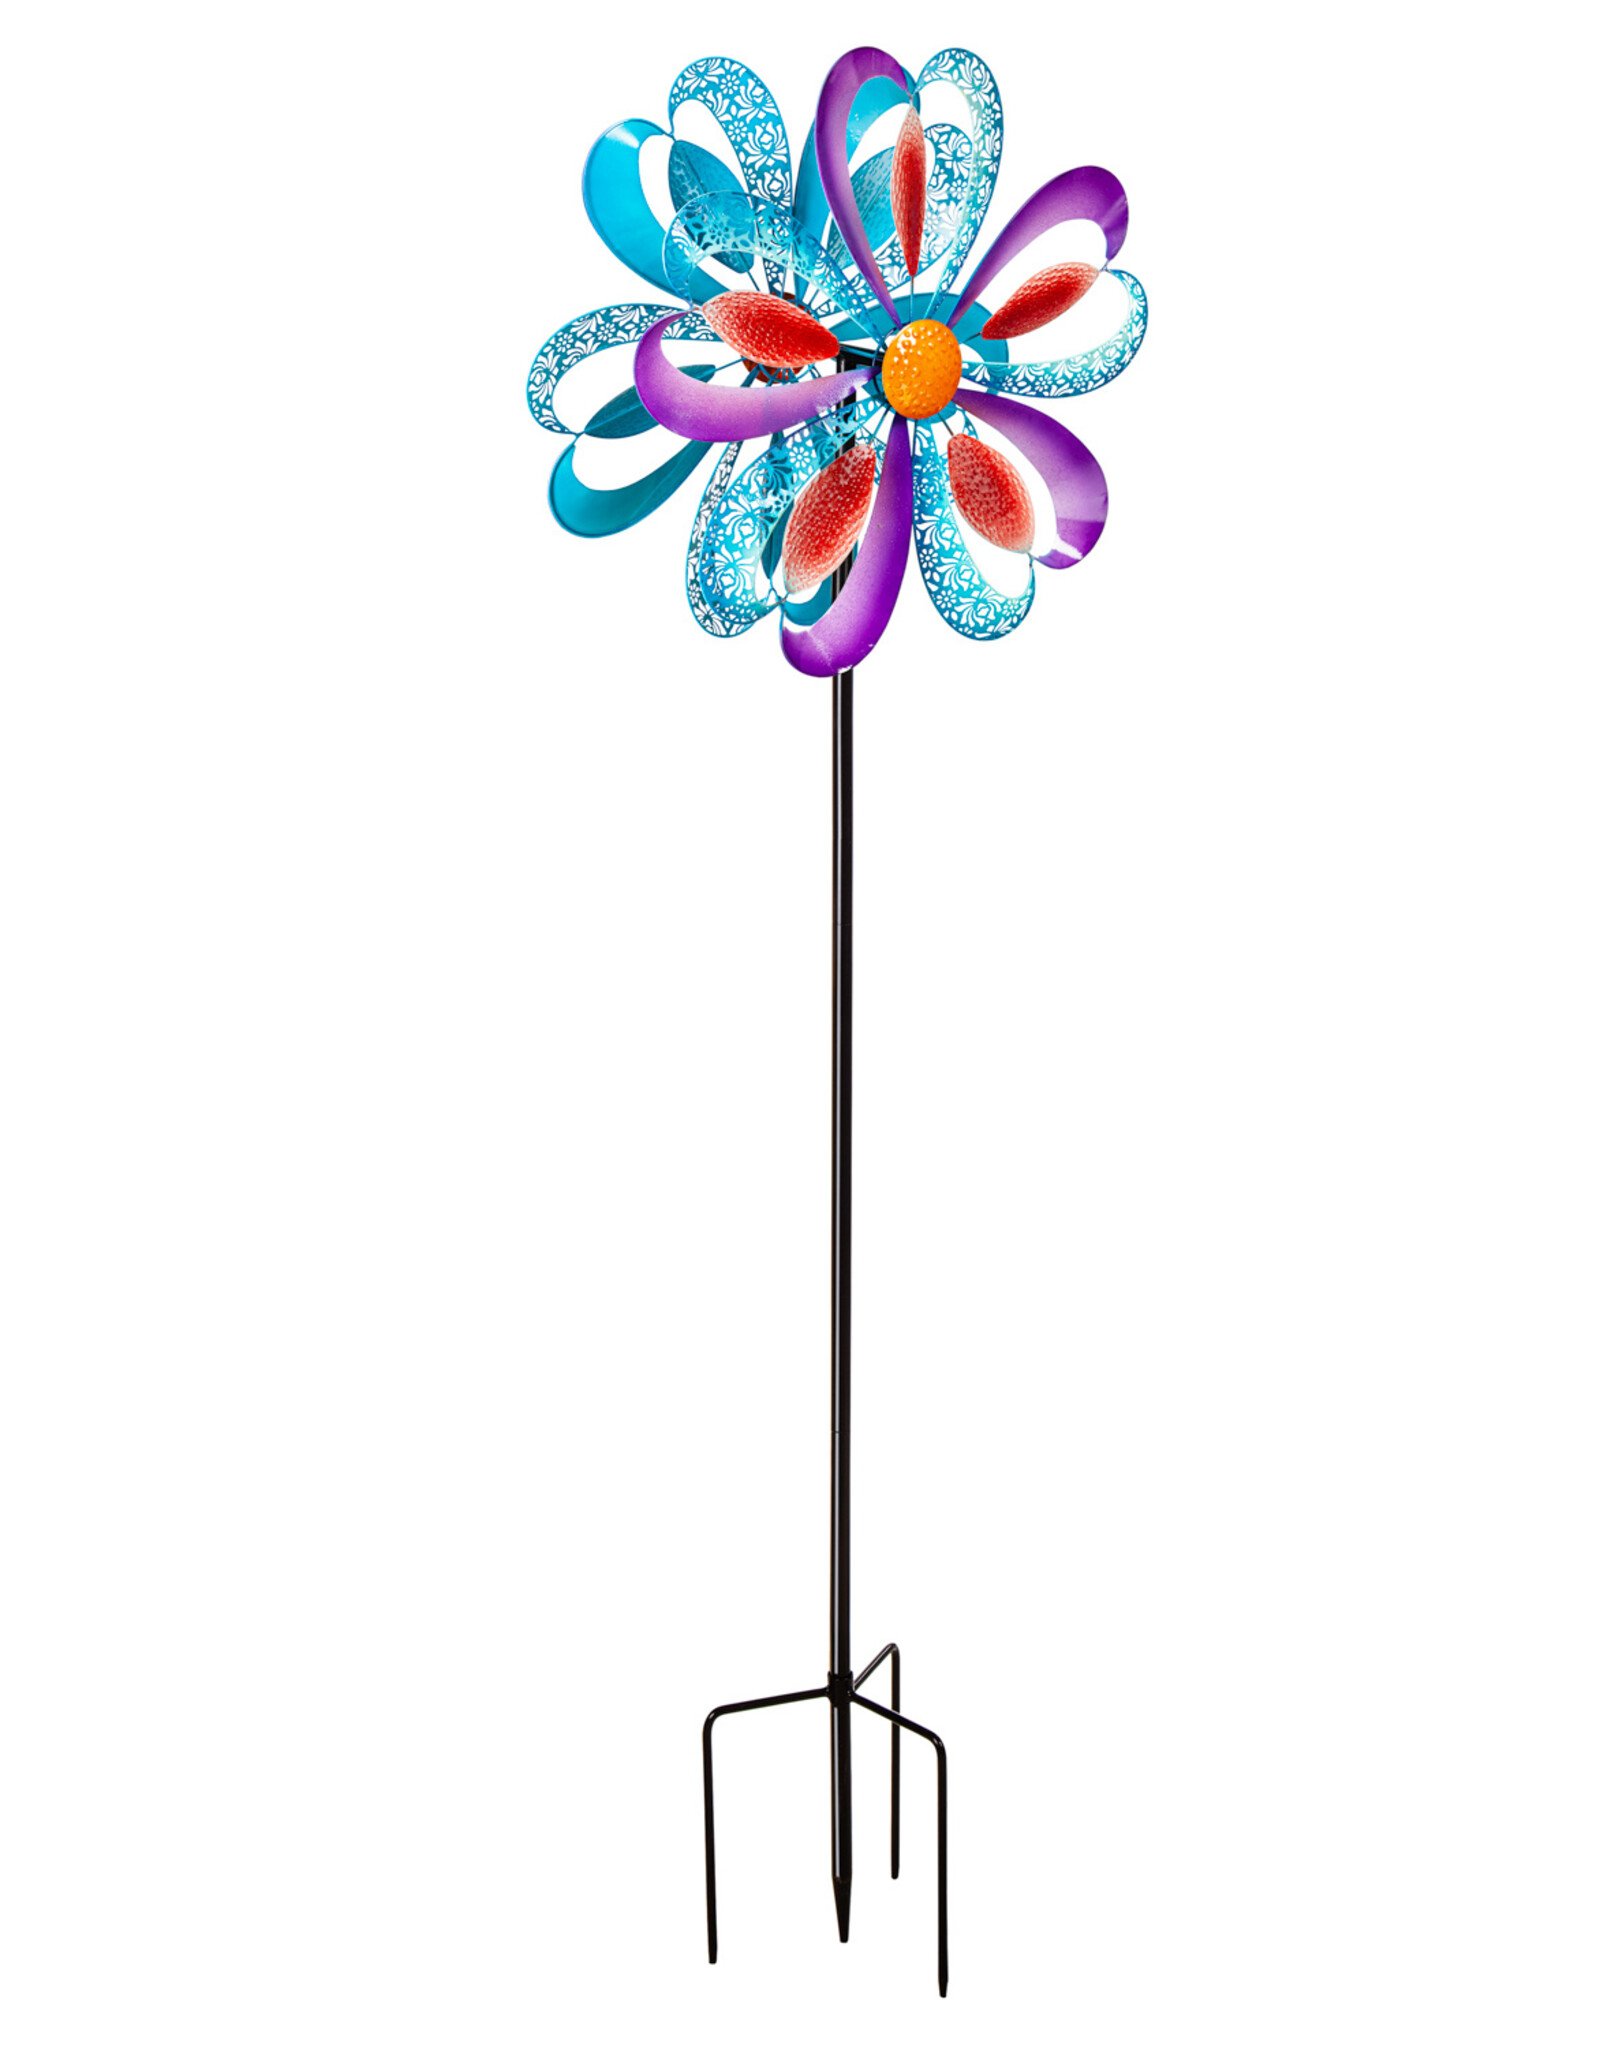 Evergreen COLORFUL BOWS WIND SPINNER - garden stake